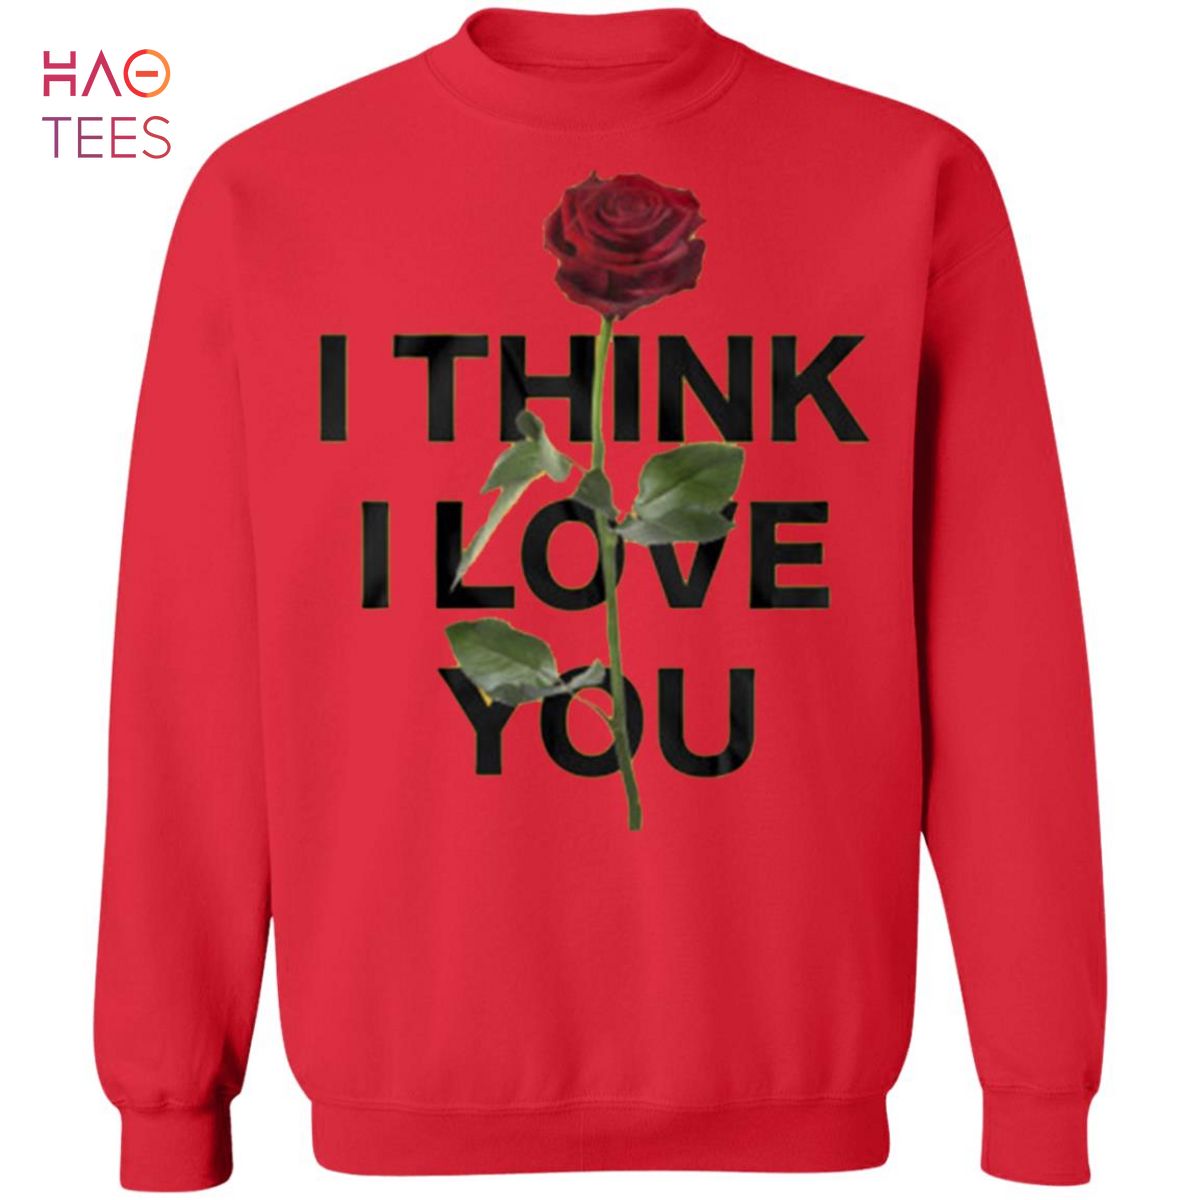 I love you sweater, Collection 2022